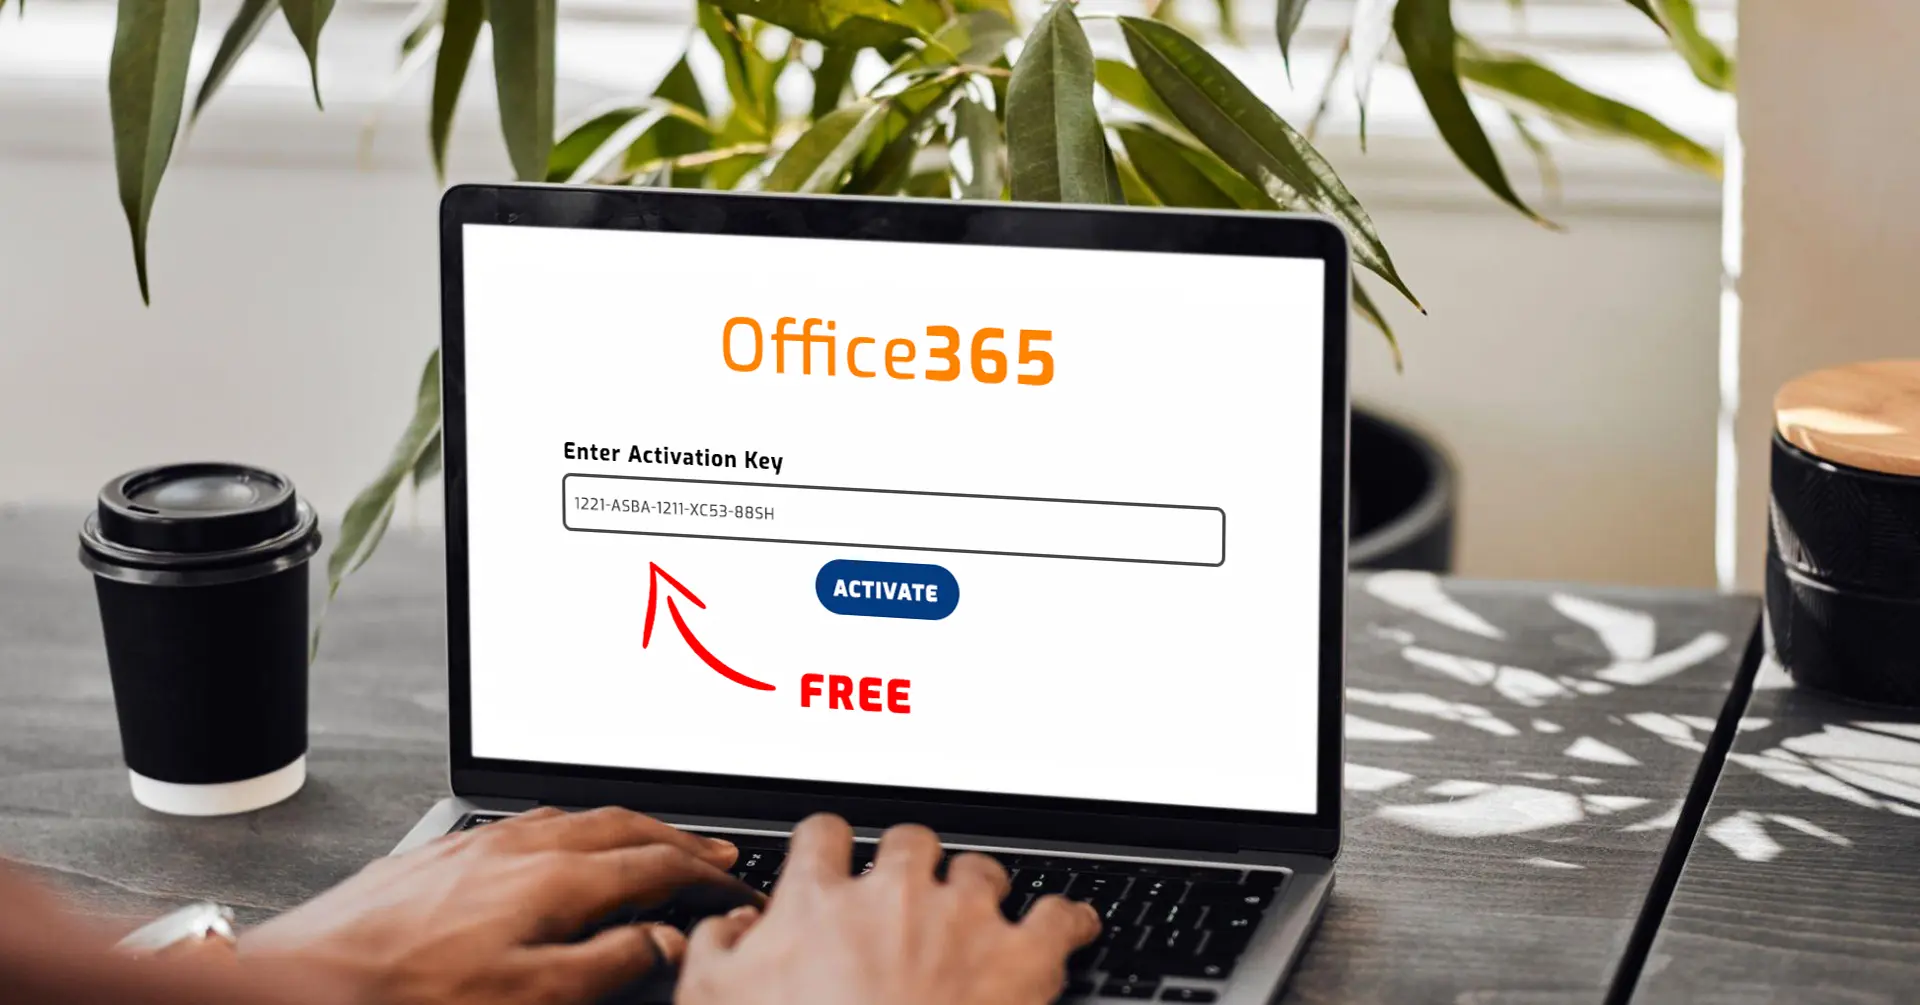 Microsoft Office Product Key Free Boost Your Productivity Today!